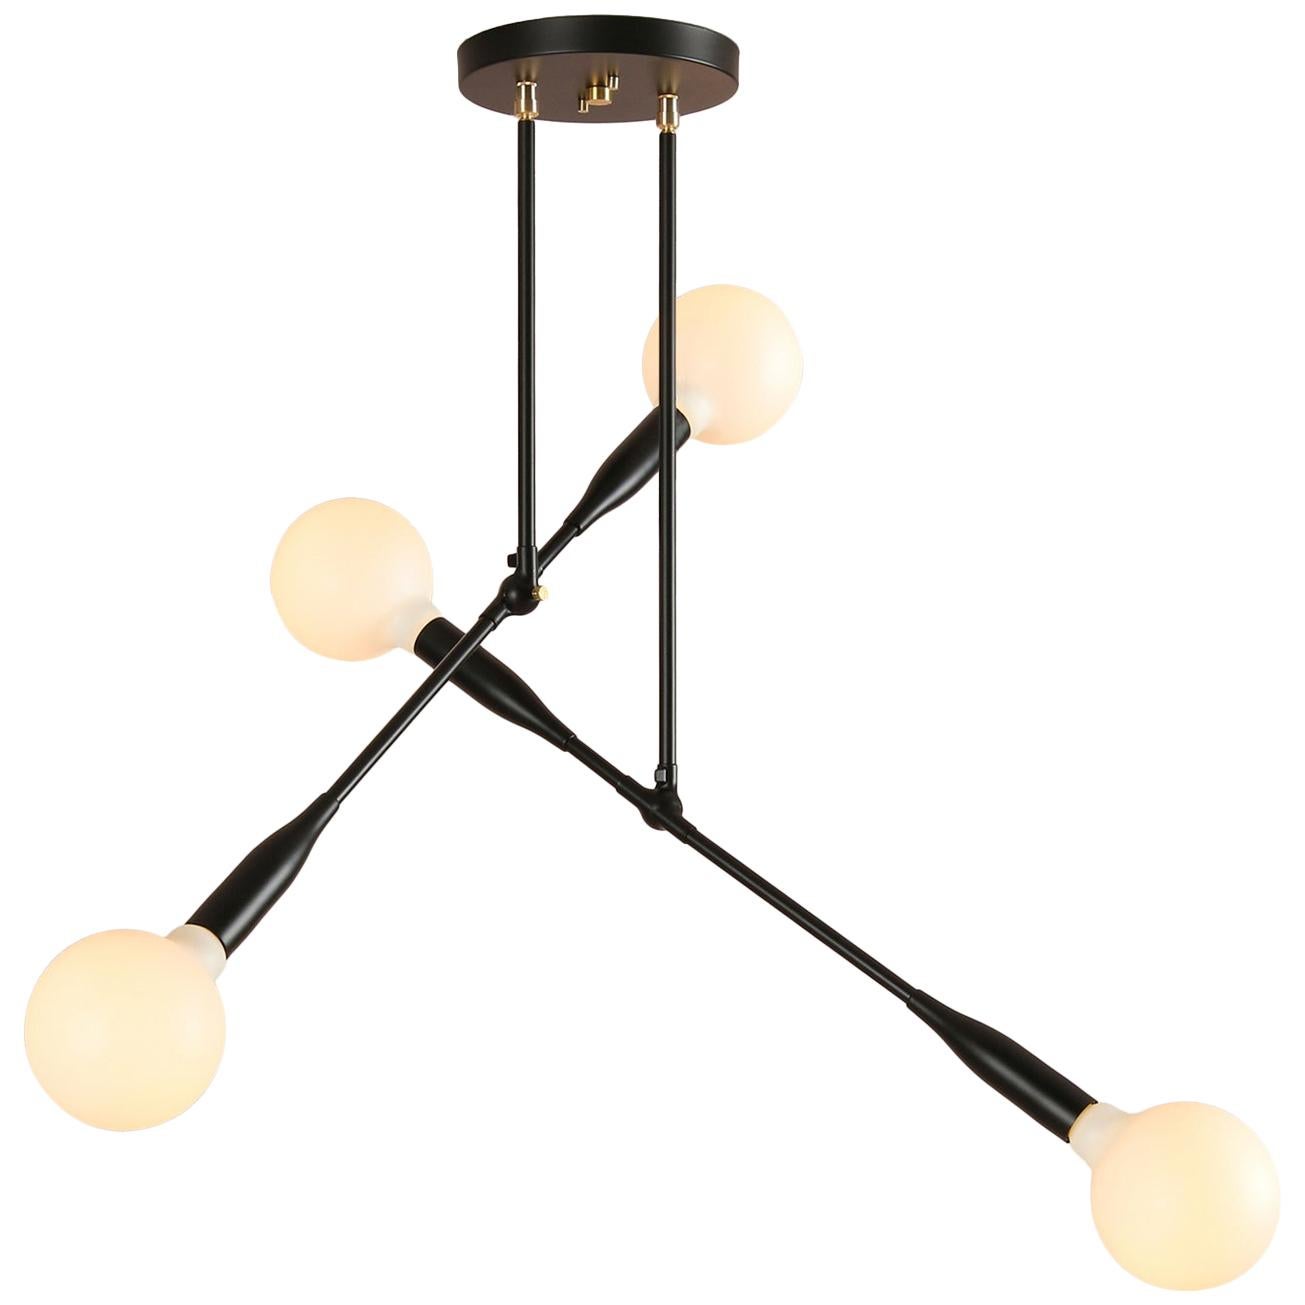 Contemporary Linear Thia Duo Light in Black Poppy by Studio Dunn